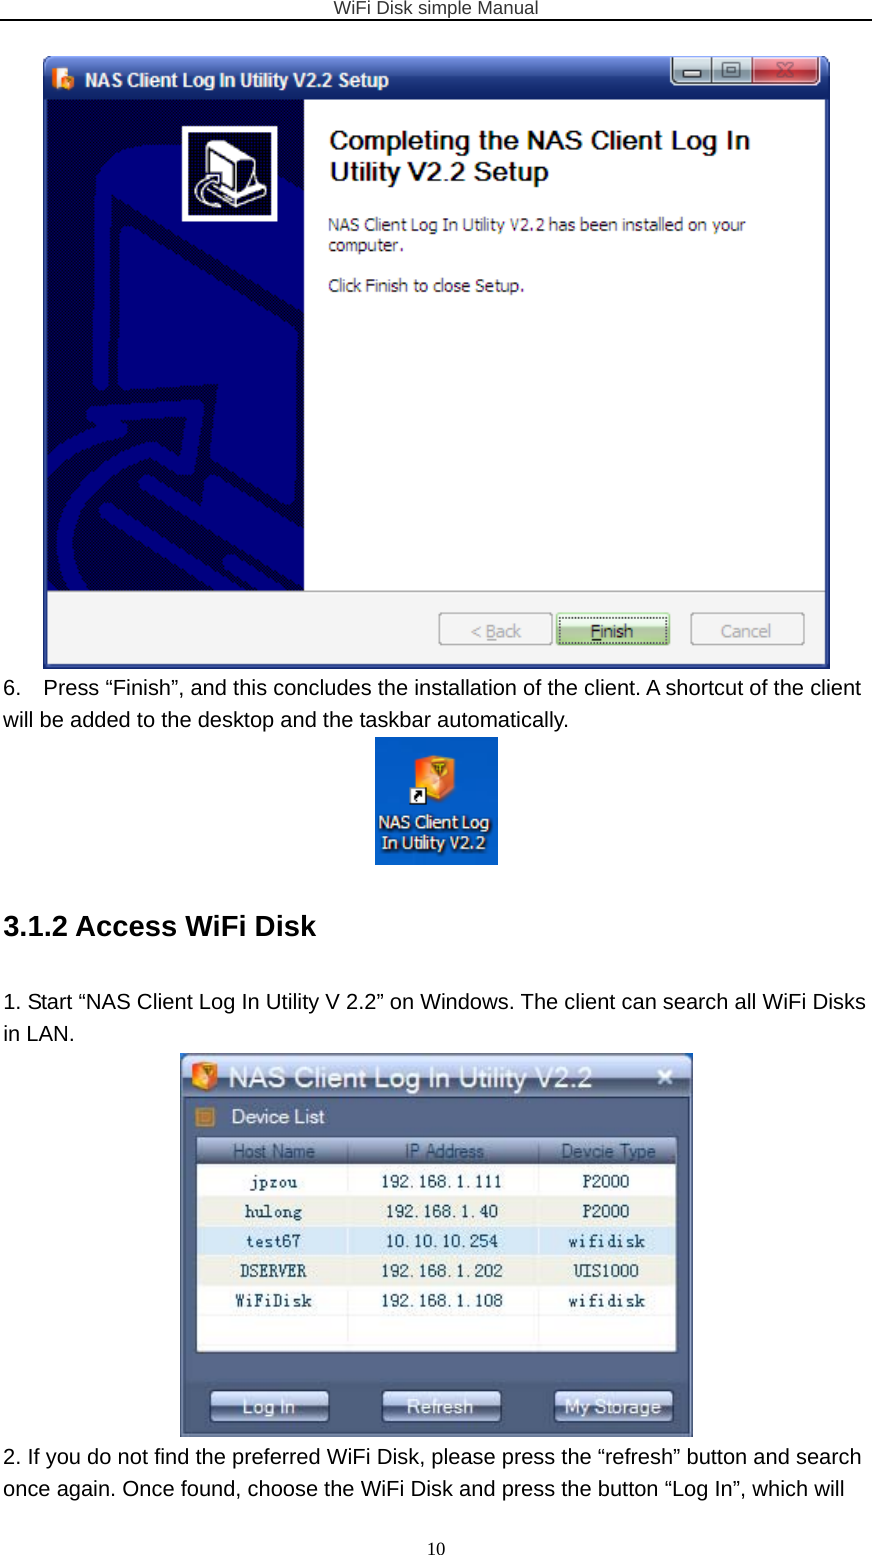 WiFi Disk simple Manual  10 6.    Press “Finish”, and this concludes the installation of the client. A shortcut of the client will be added to the desktop and the taskbar automatically.  3.1.2 Access WiFi Disk   1. Start “NAS Client Log In Utility V 2.2” on Windows. The client can search all WiFi Disks in LAN.  2. If you do not find the preferred WiFi Disk, please press the “refresh” button and search once again. Once found, choose the WiFi Disk and press the button “Log In”, which will 